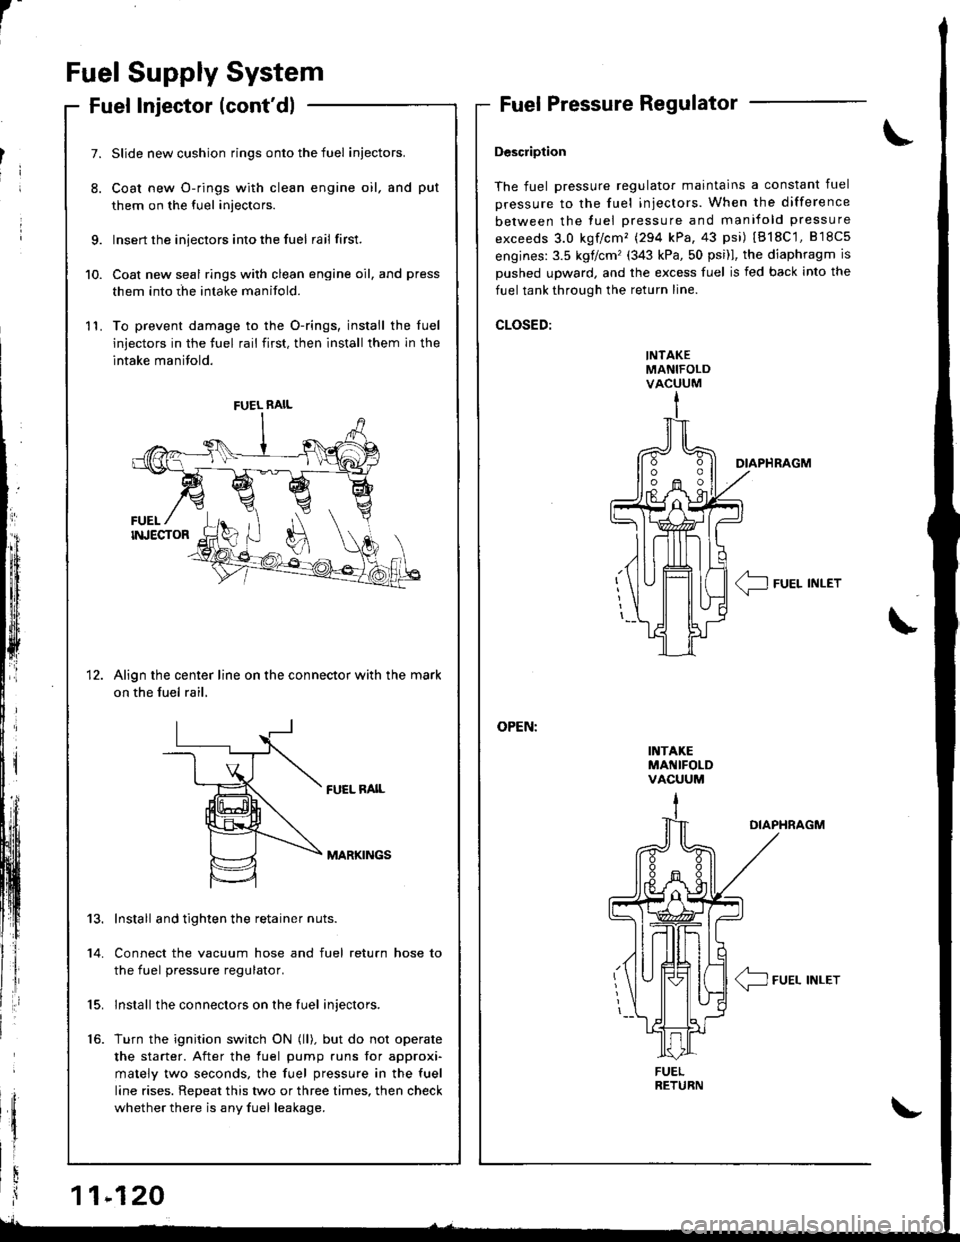 HONDA INTEGRA 1998 4.G Owners Guide I
Fuel Supply System
Fuel Injector (contdlFuel Pressure Regulator
Description
The fuel pressure regulator maintains a constant fuel
pressure to the fuel injectors. When the difference
between the fue